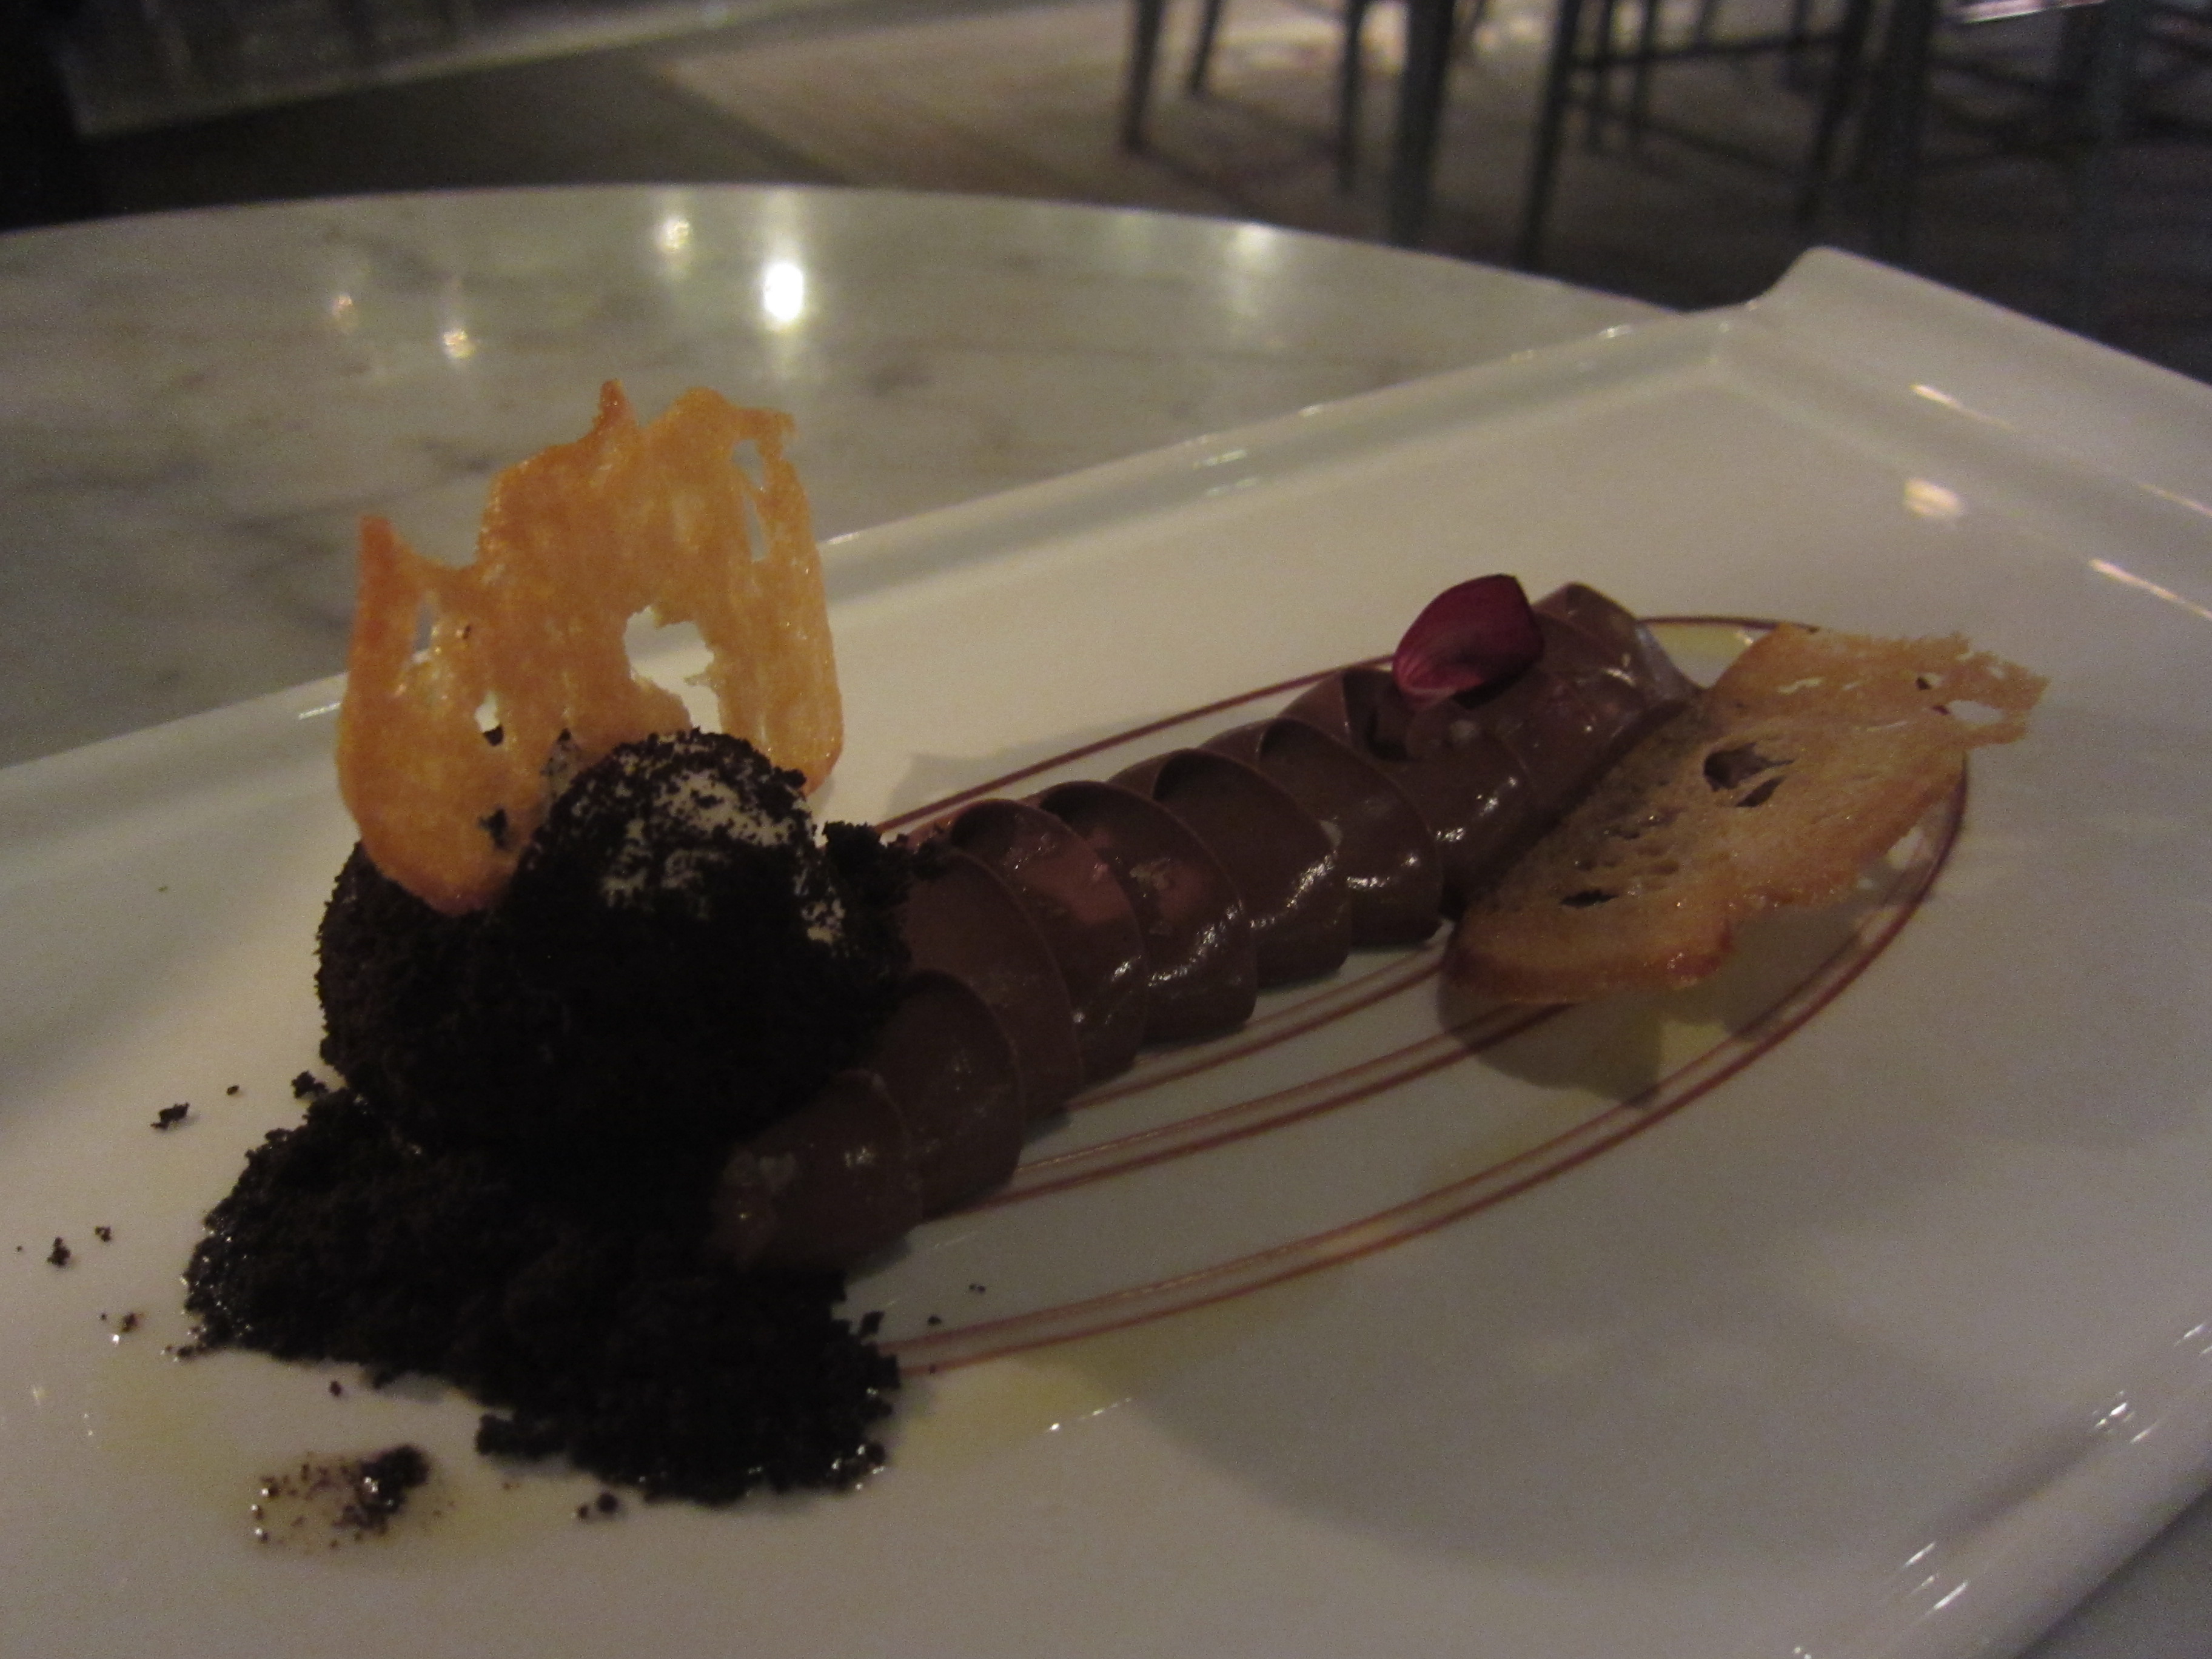  - The-Bazaar-by-Jose-Andres-Pan-con-Chocolate